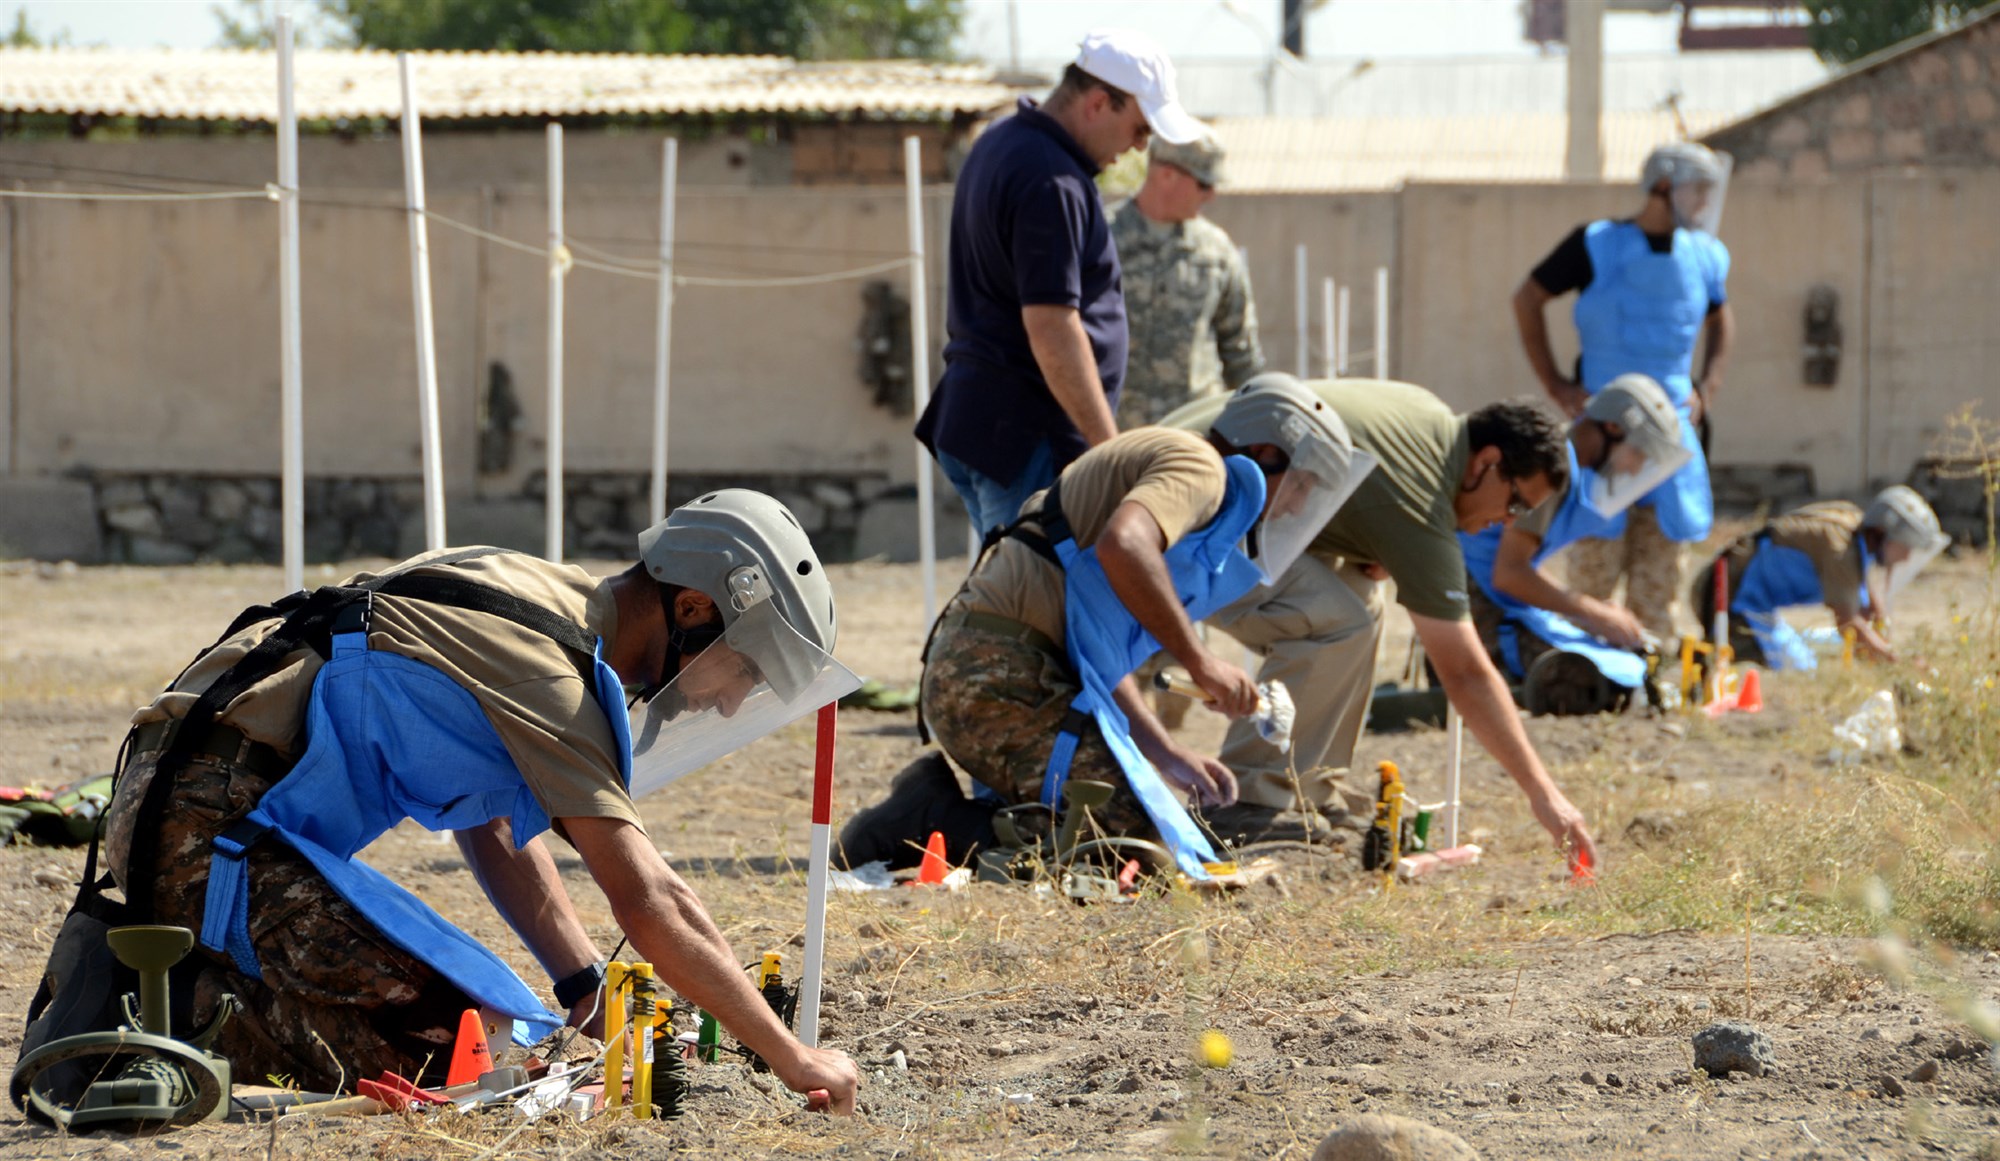 Soldiers from the Engineering Companies of the Armenian Peacekeeping Brigade conduct a simulated one-man demining drill as part of a training course taught by soldiers of the Kansas National Guard and a civilian representative from the U.S. Humanitarian Demining Training Center. Kansas National Guardsmen and the HDTC representative are instructing Armenian peacekeepers and engineer battalions on international demining standards as part of the Humanitarian Mine Action program and will assist the Armenian government in developing a national standard operating procedure for demining.